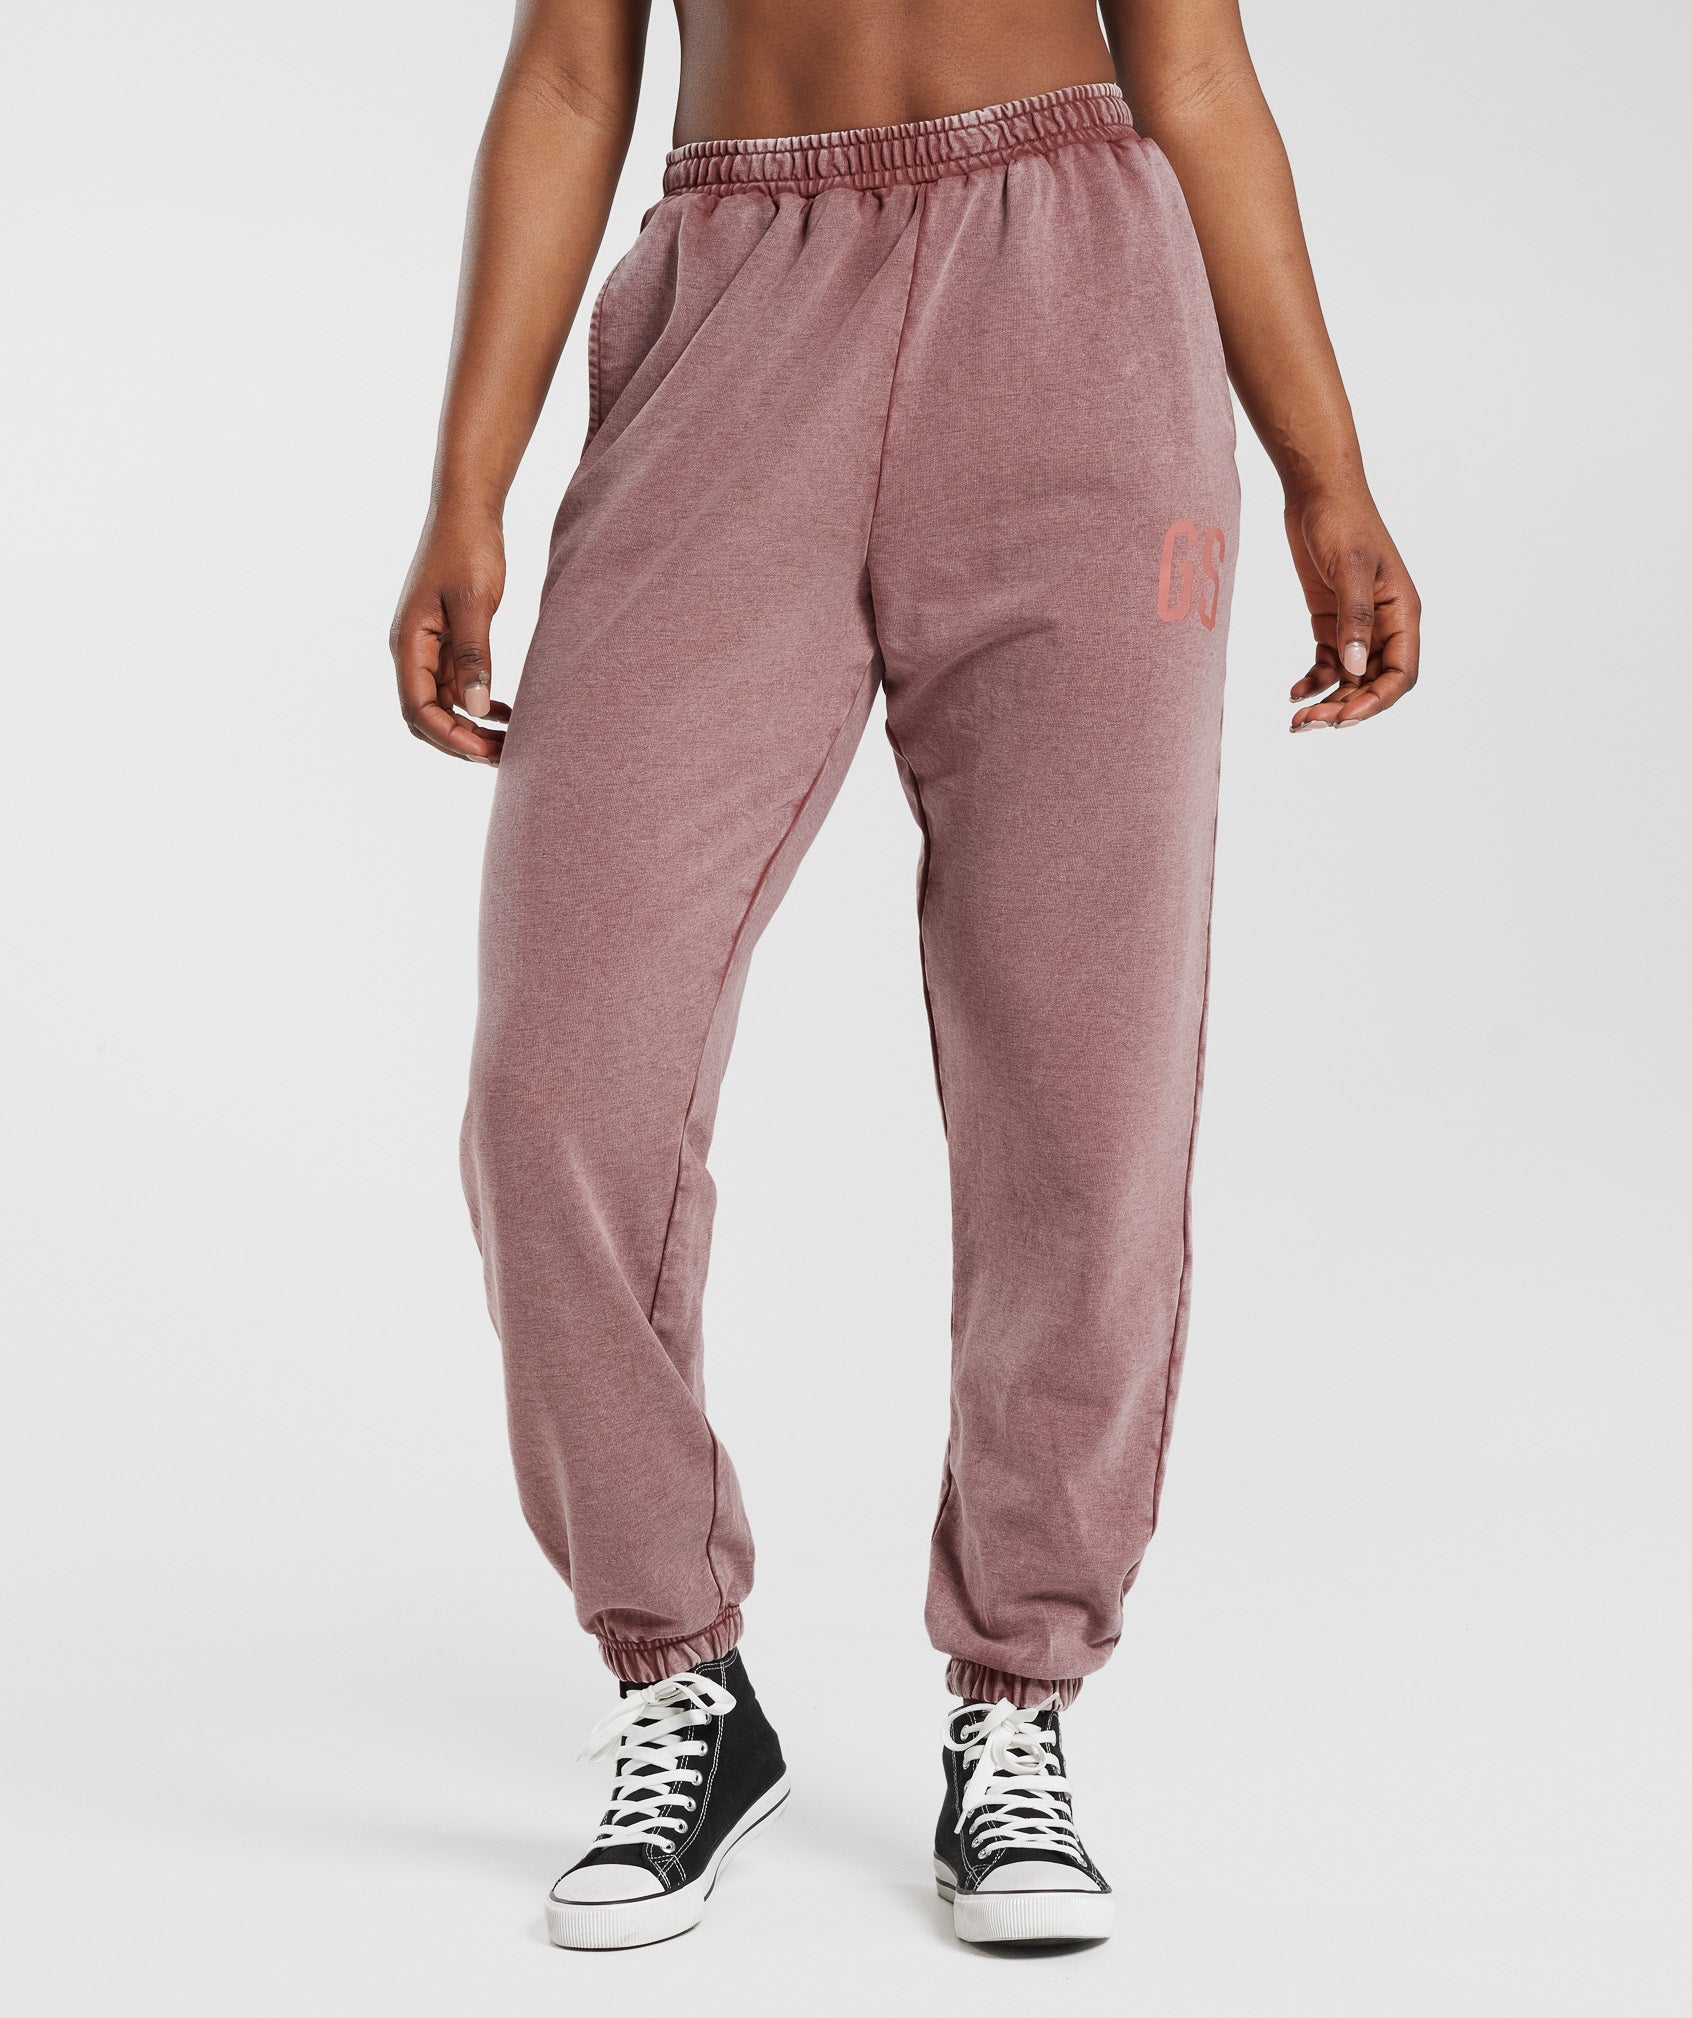 Collegiate Joggers in Dusty Maroon - view 1